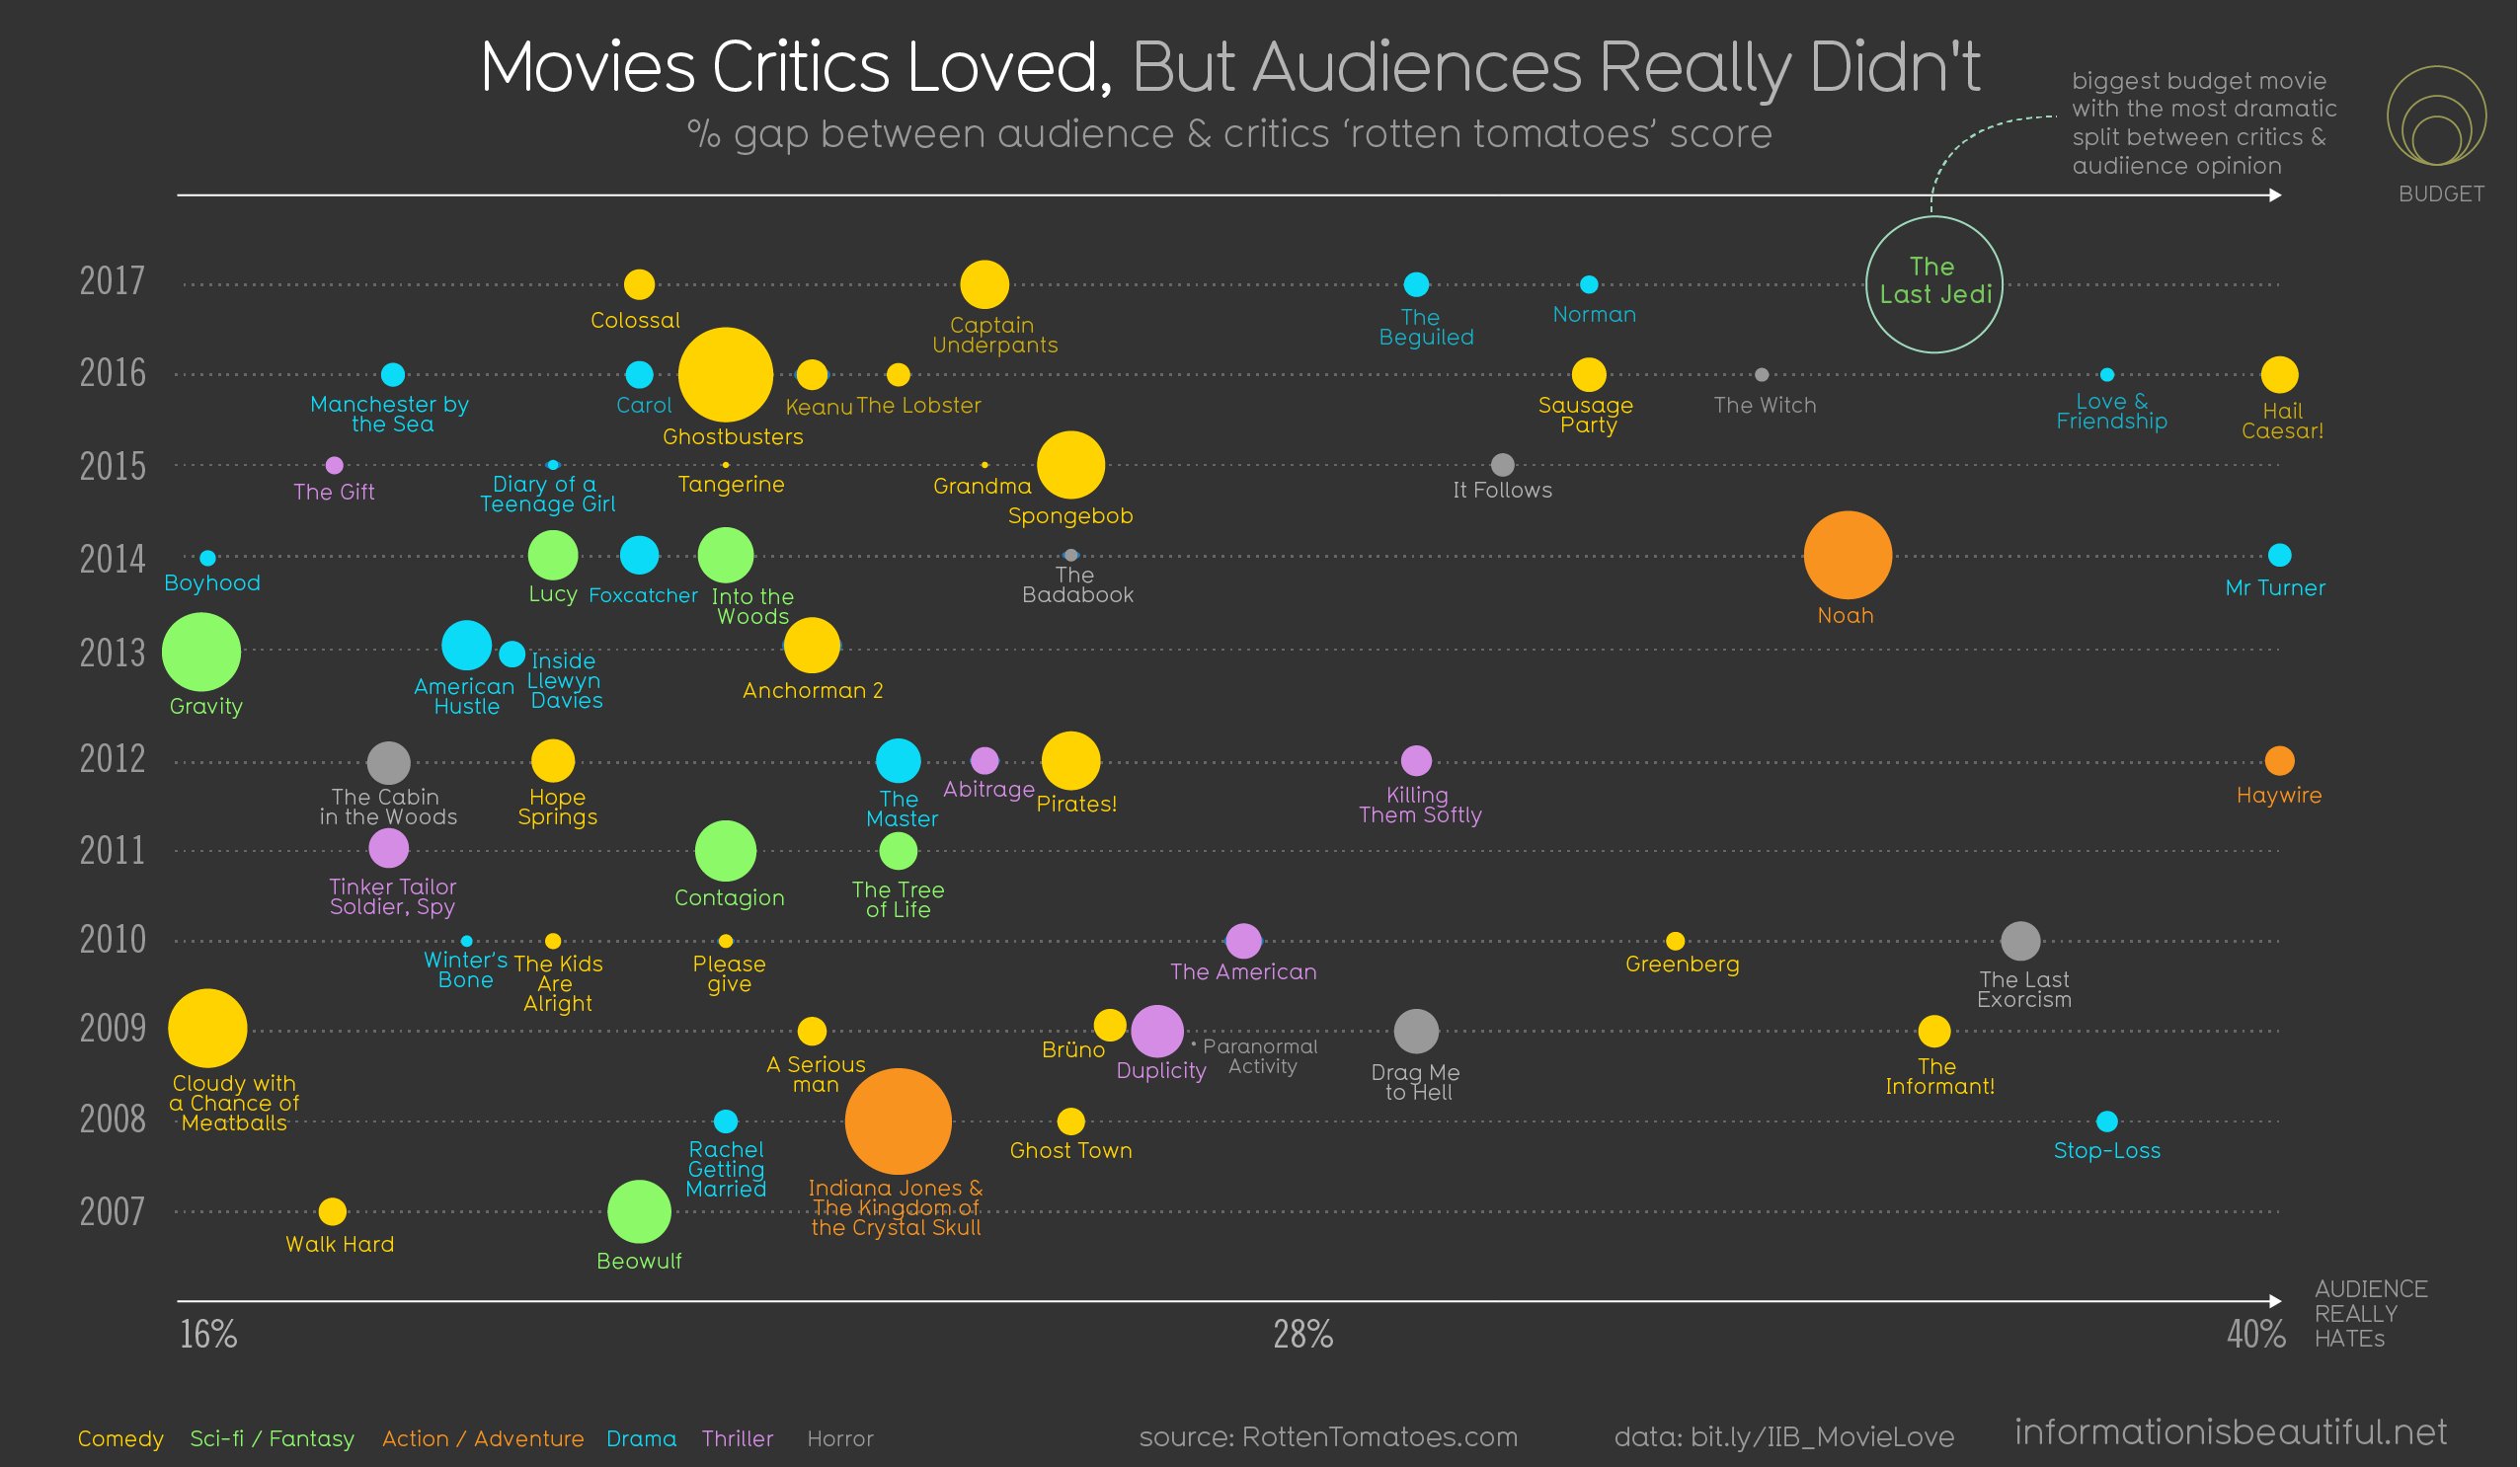 Information is beatiful - movies critic vs audience